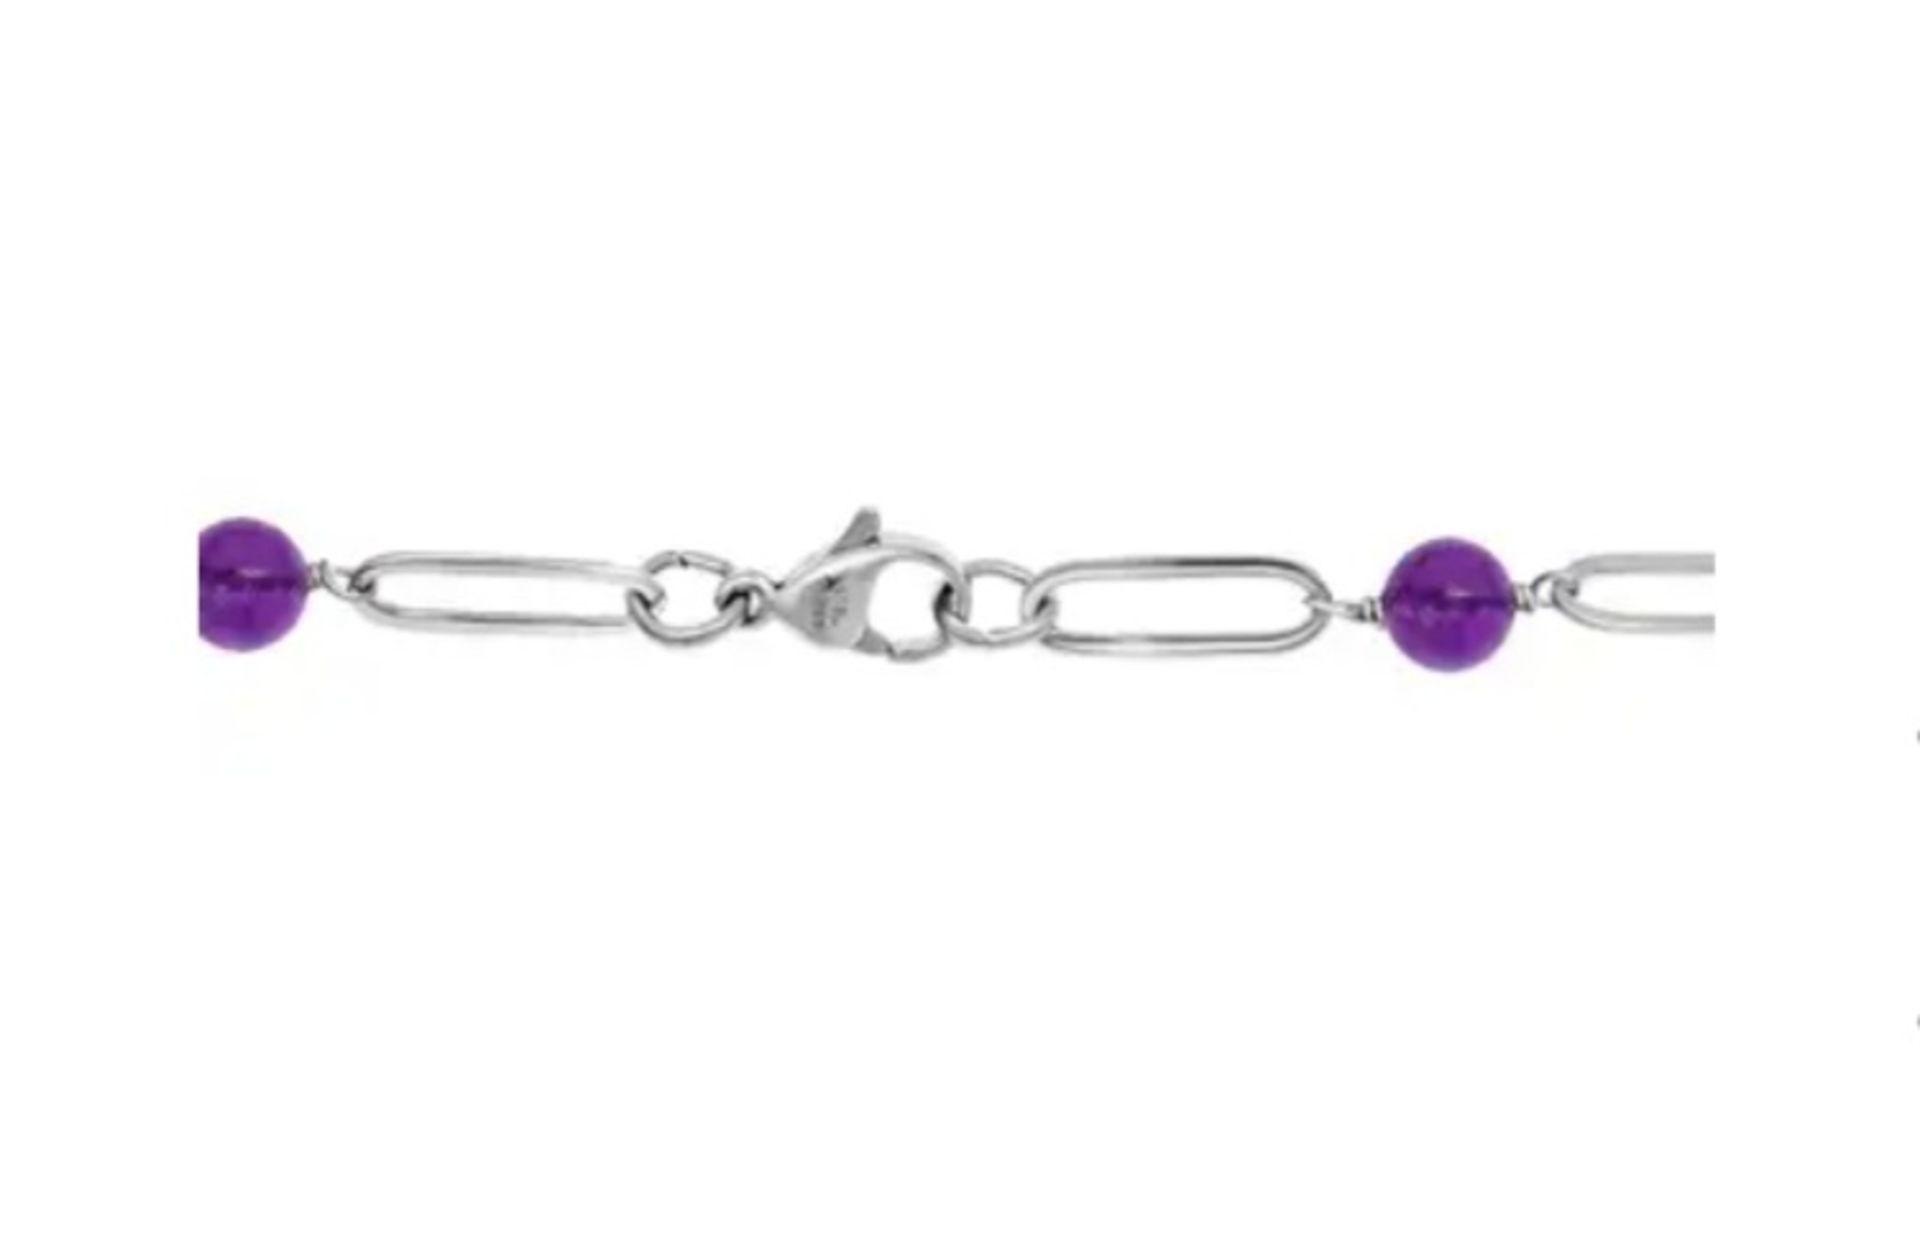 New! Amethyst Necklace in Stainless Steel - Image 4 of 4